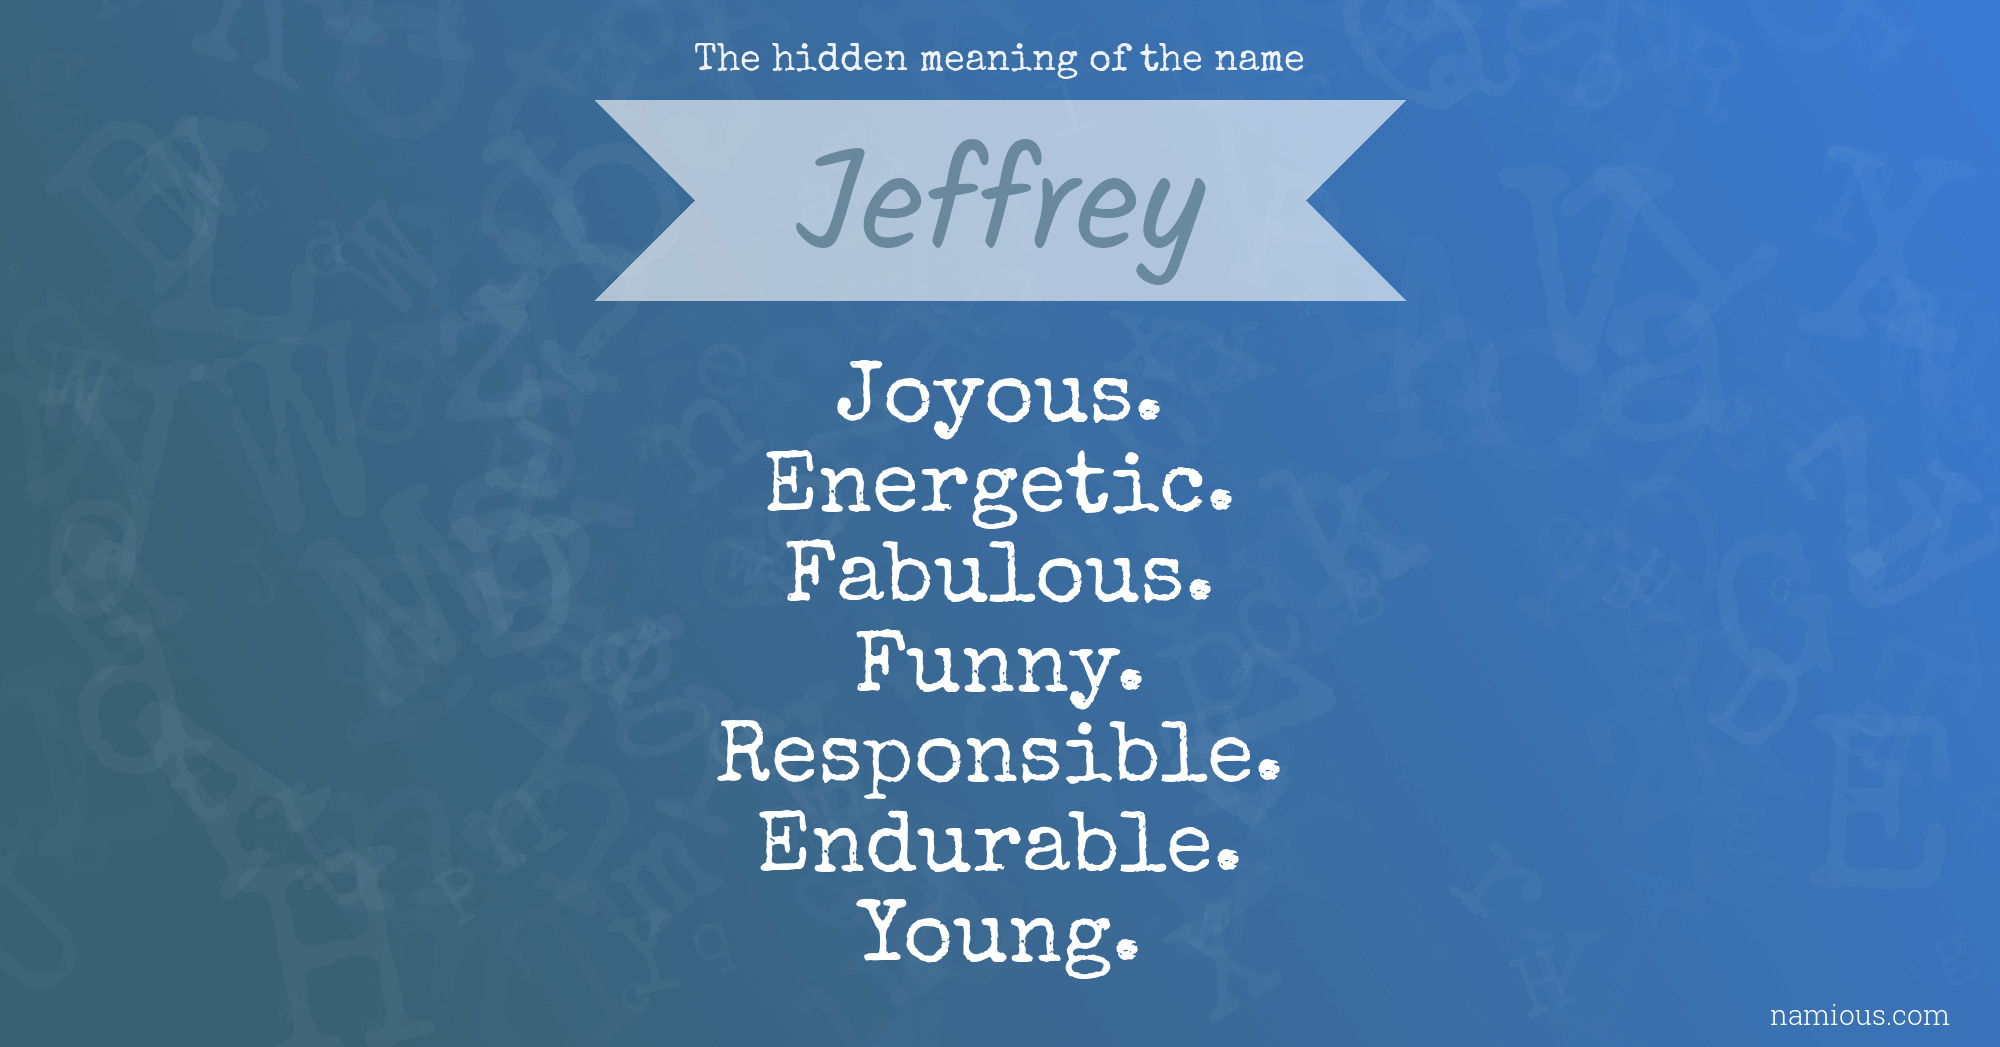 The hidden meaning of the name Jeffrey